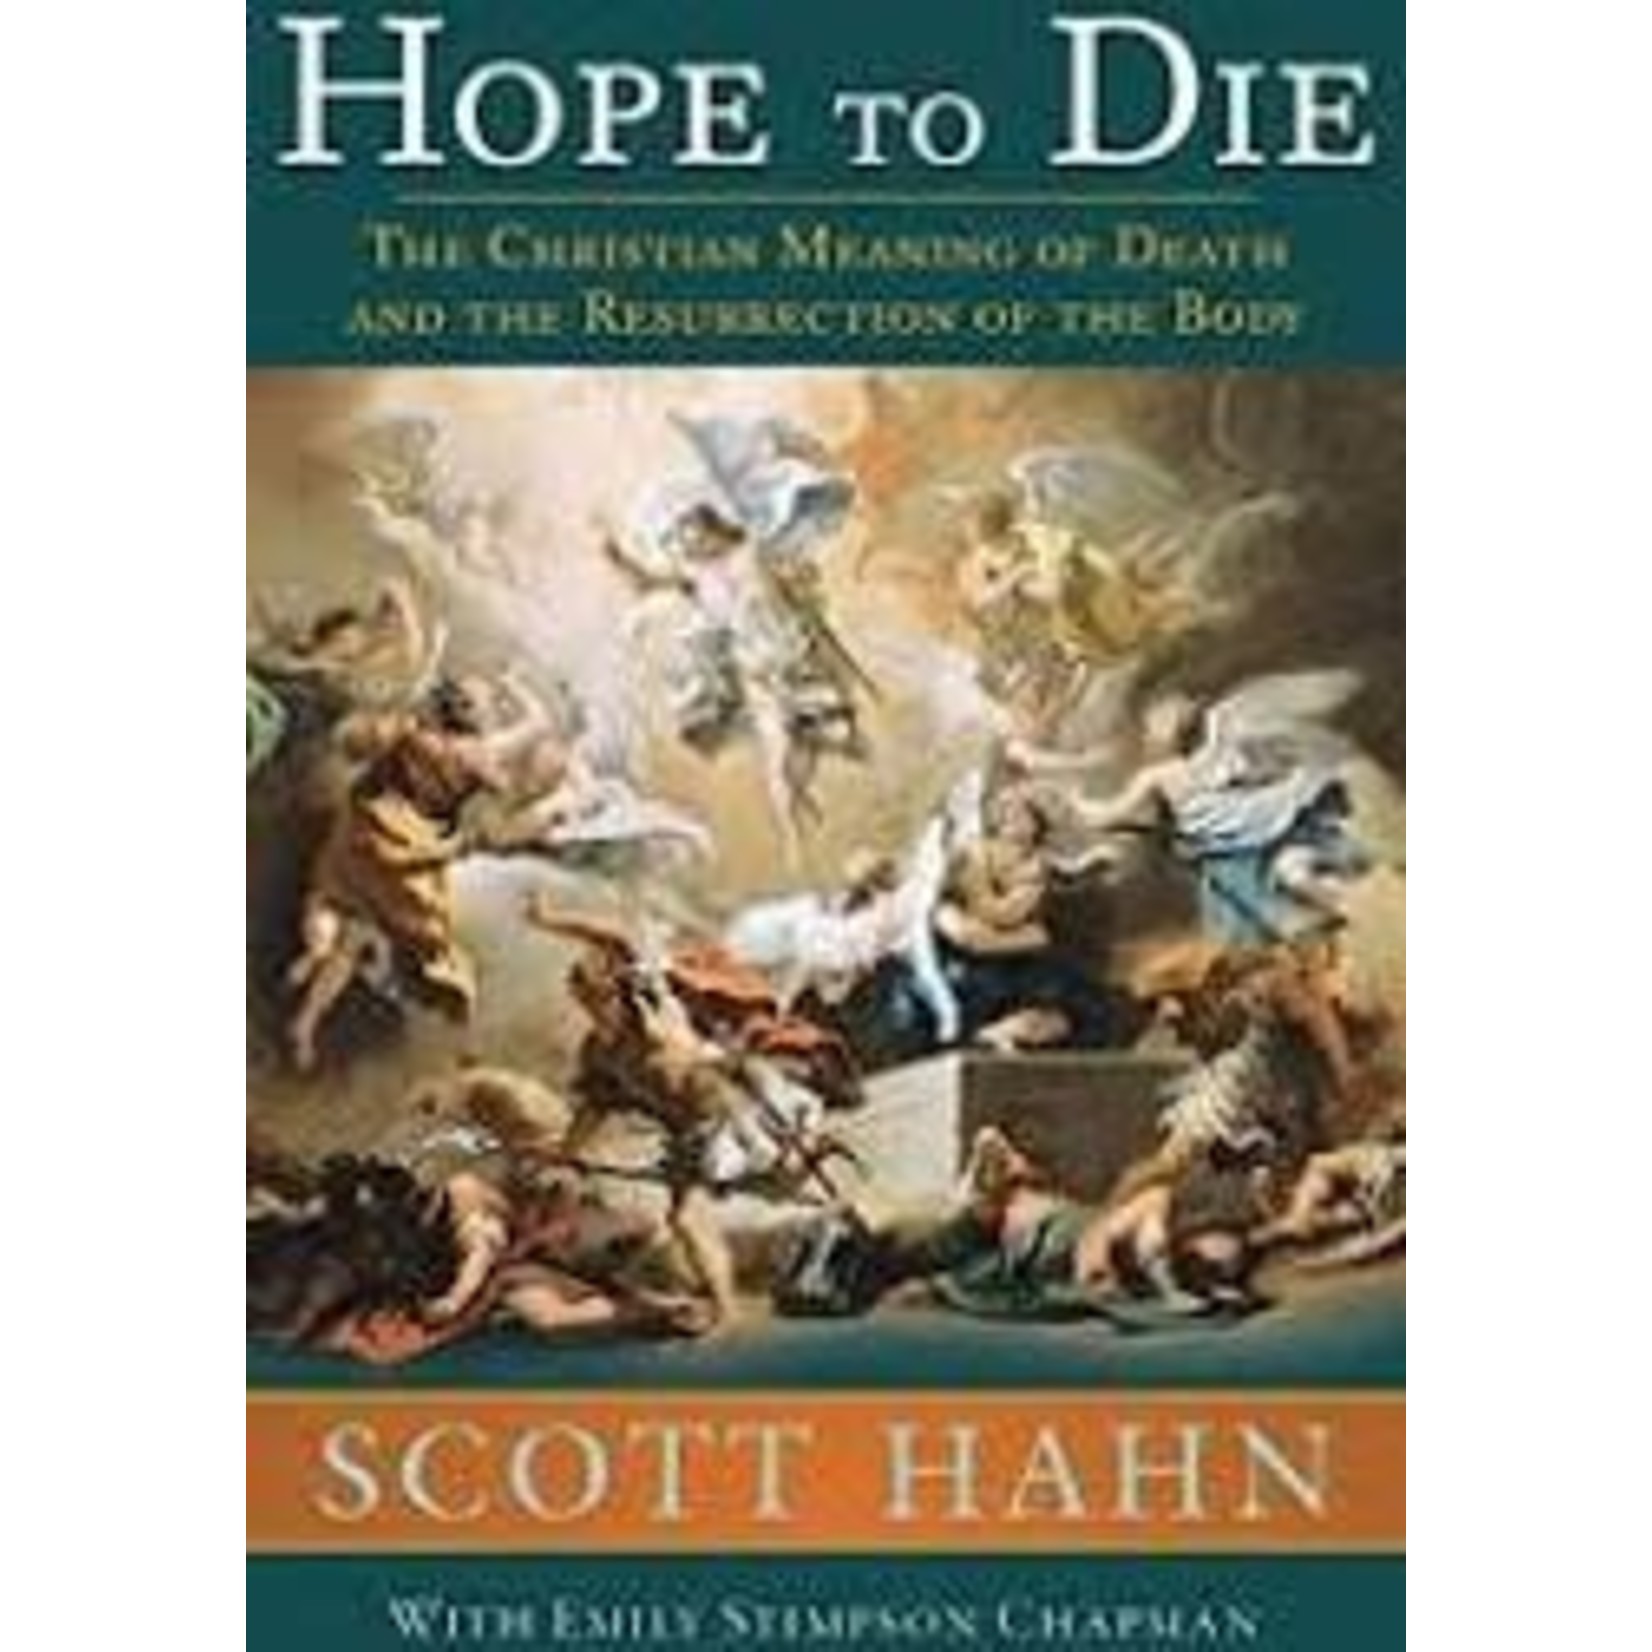 Hope to Die: the Christian Meaning of Death